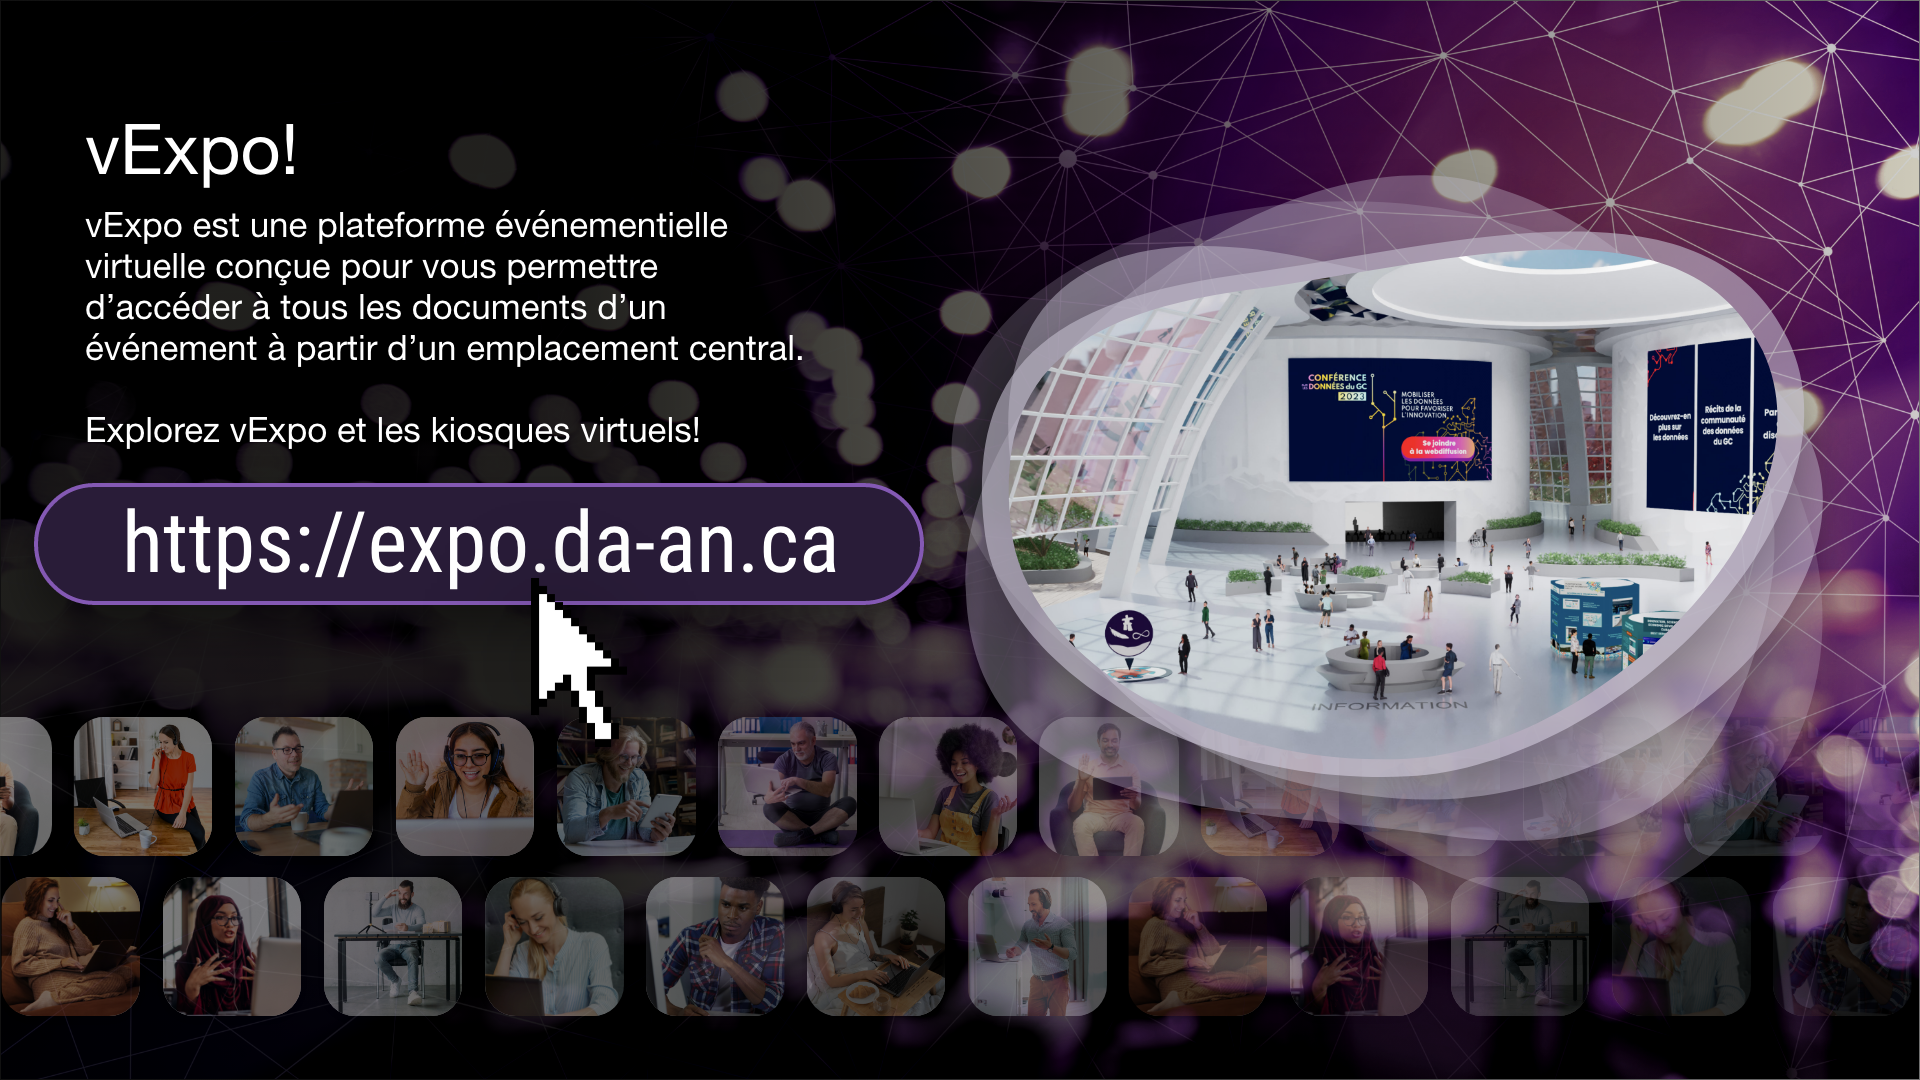 vExpo is a virtual event platform designed to provide you access to all event material from one central location.